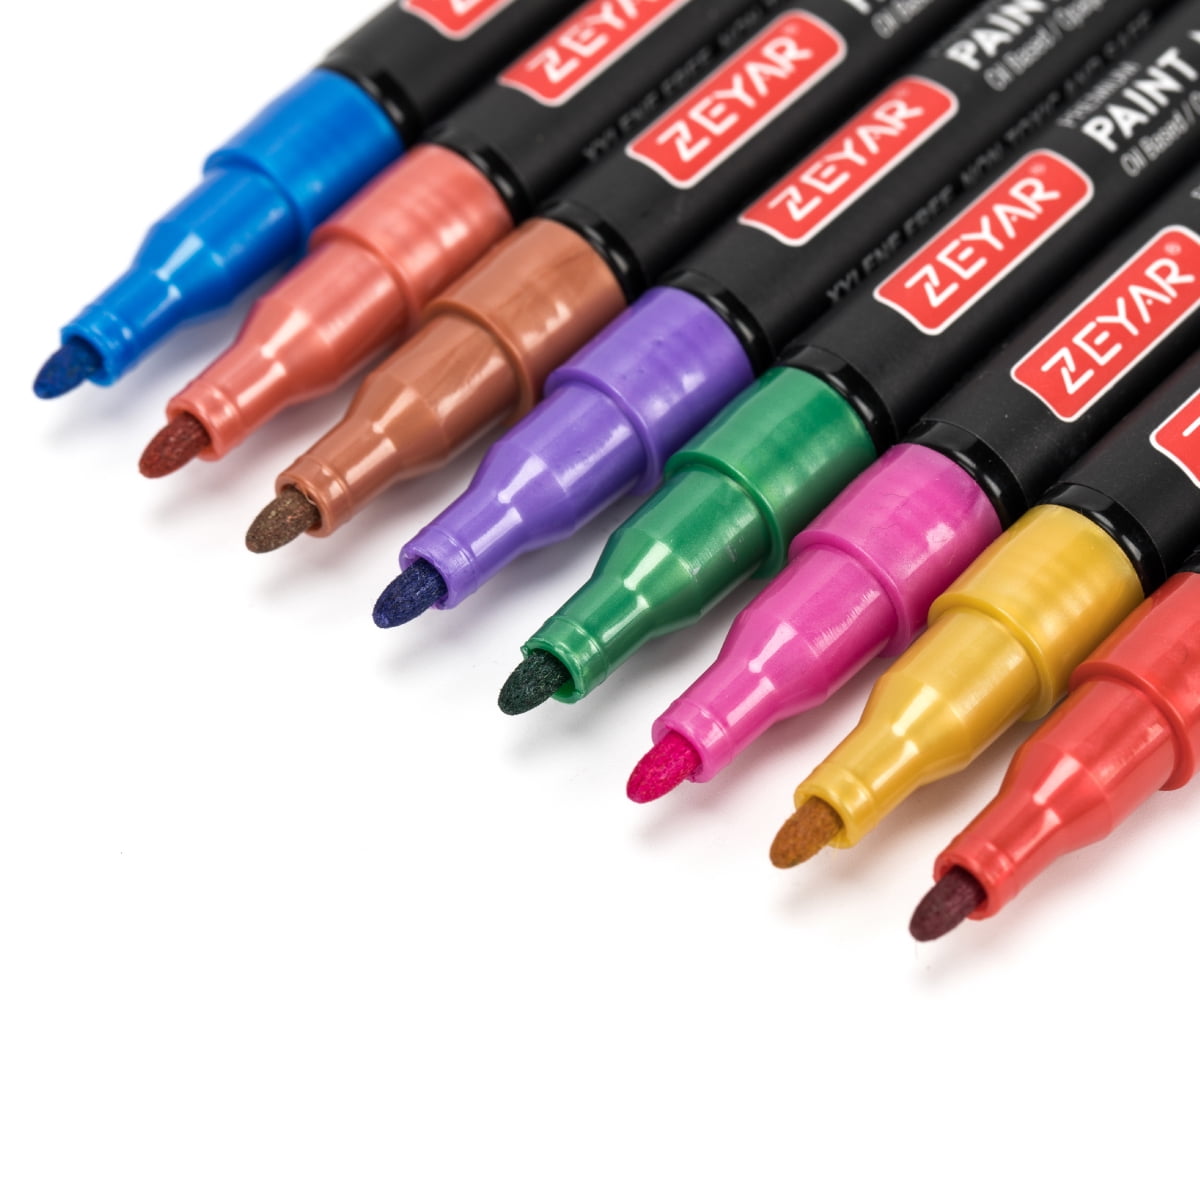 SHARPIE Oil-Based Paint Markers, Medium Point, Assorted Colors, 8